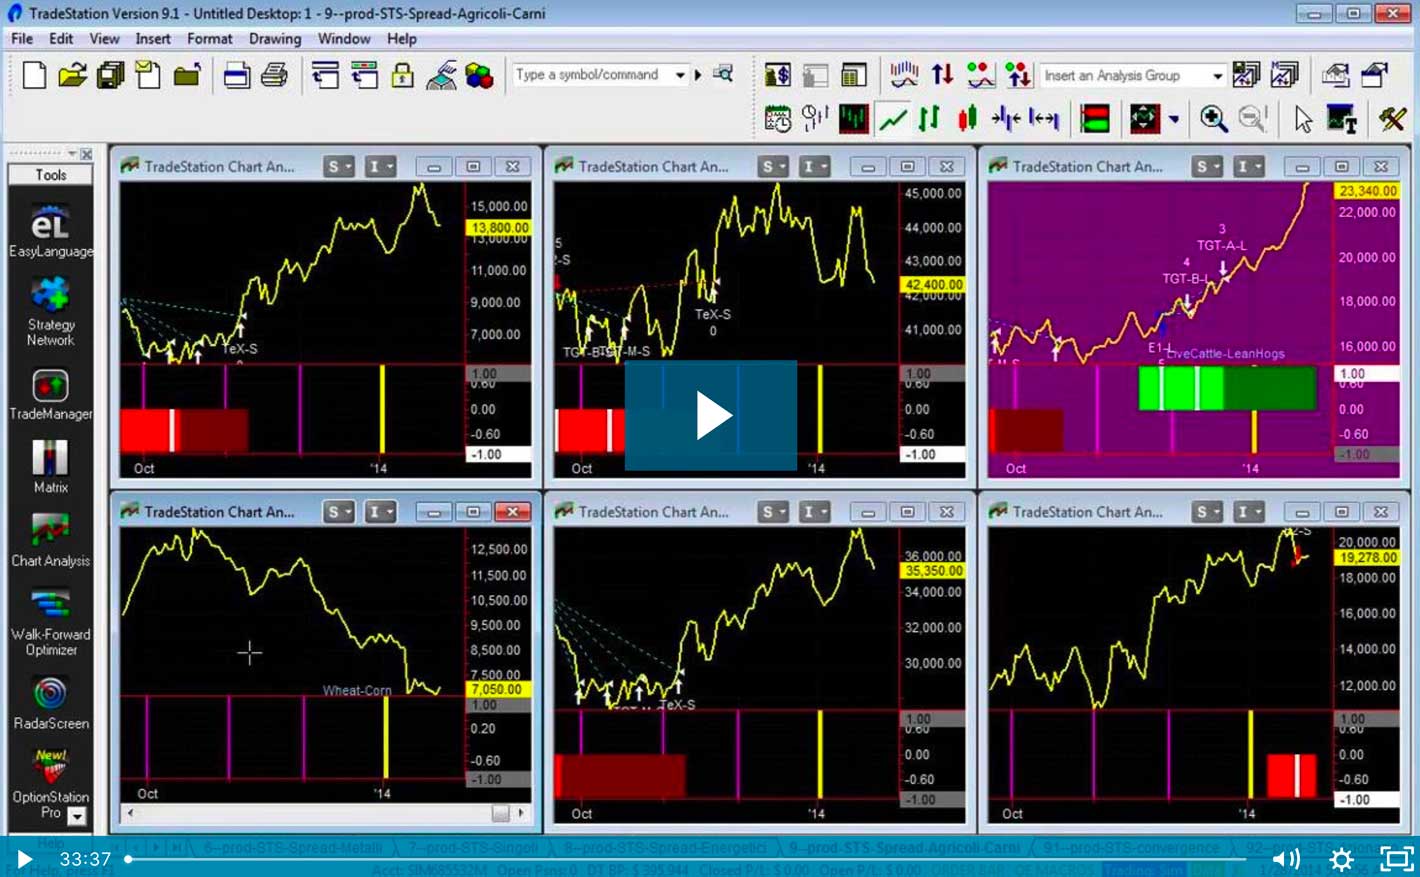 qtlab corsi trading commodities, spread trading system stagionalita commodities qtlab, corso commodities